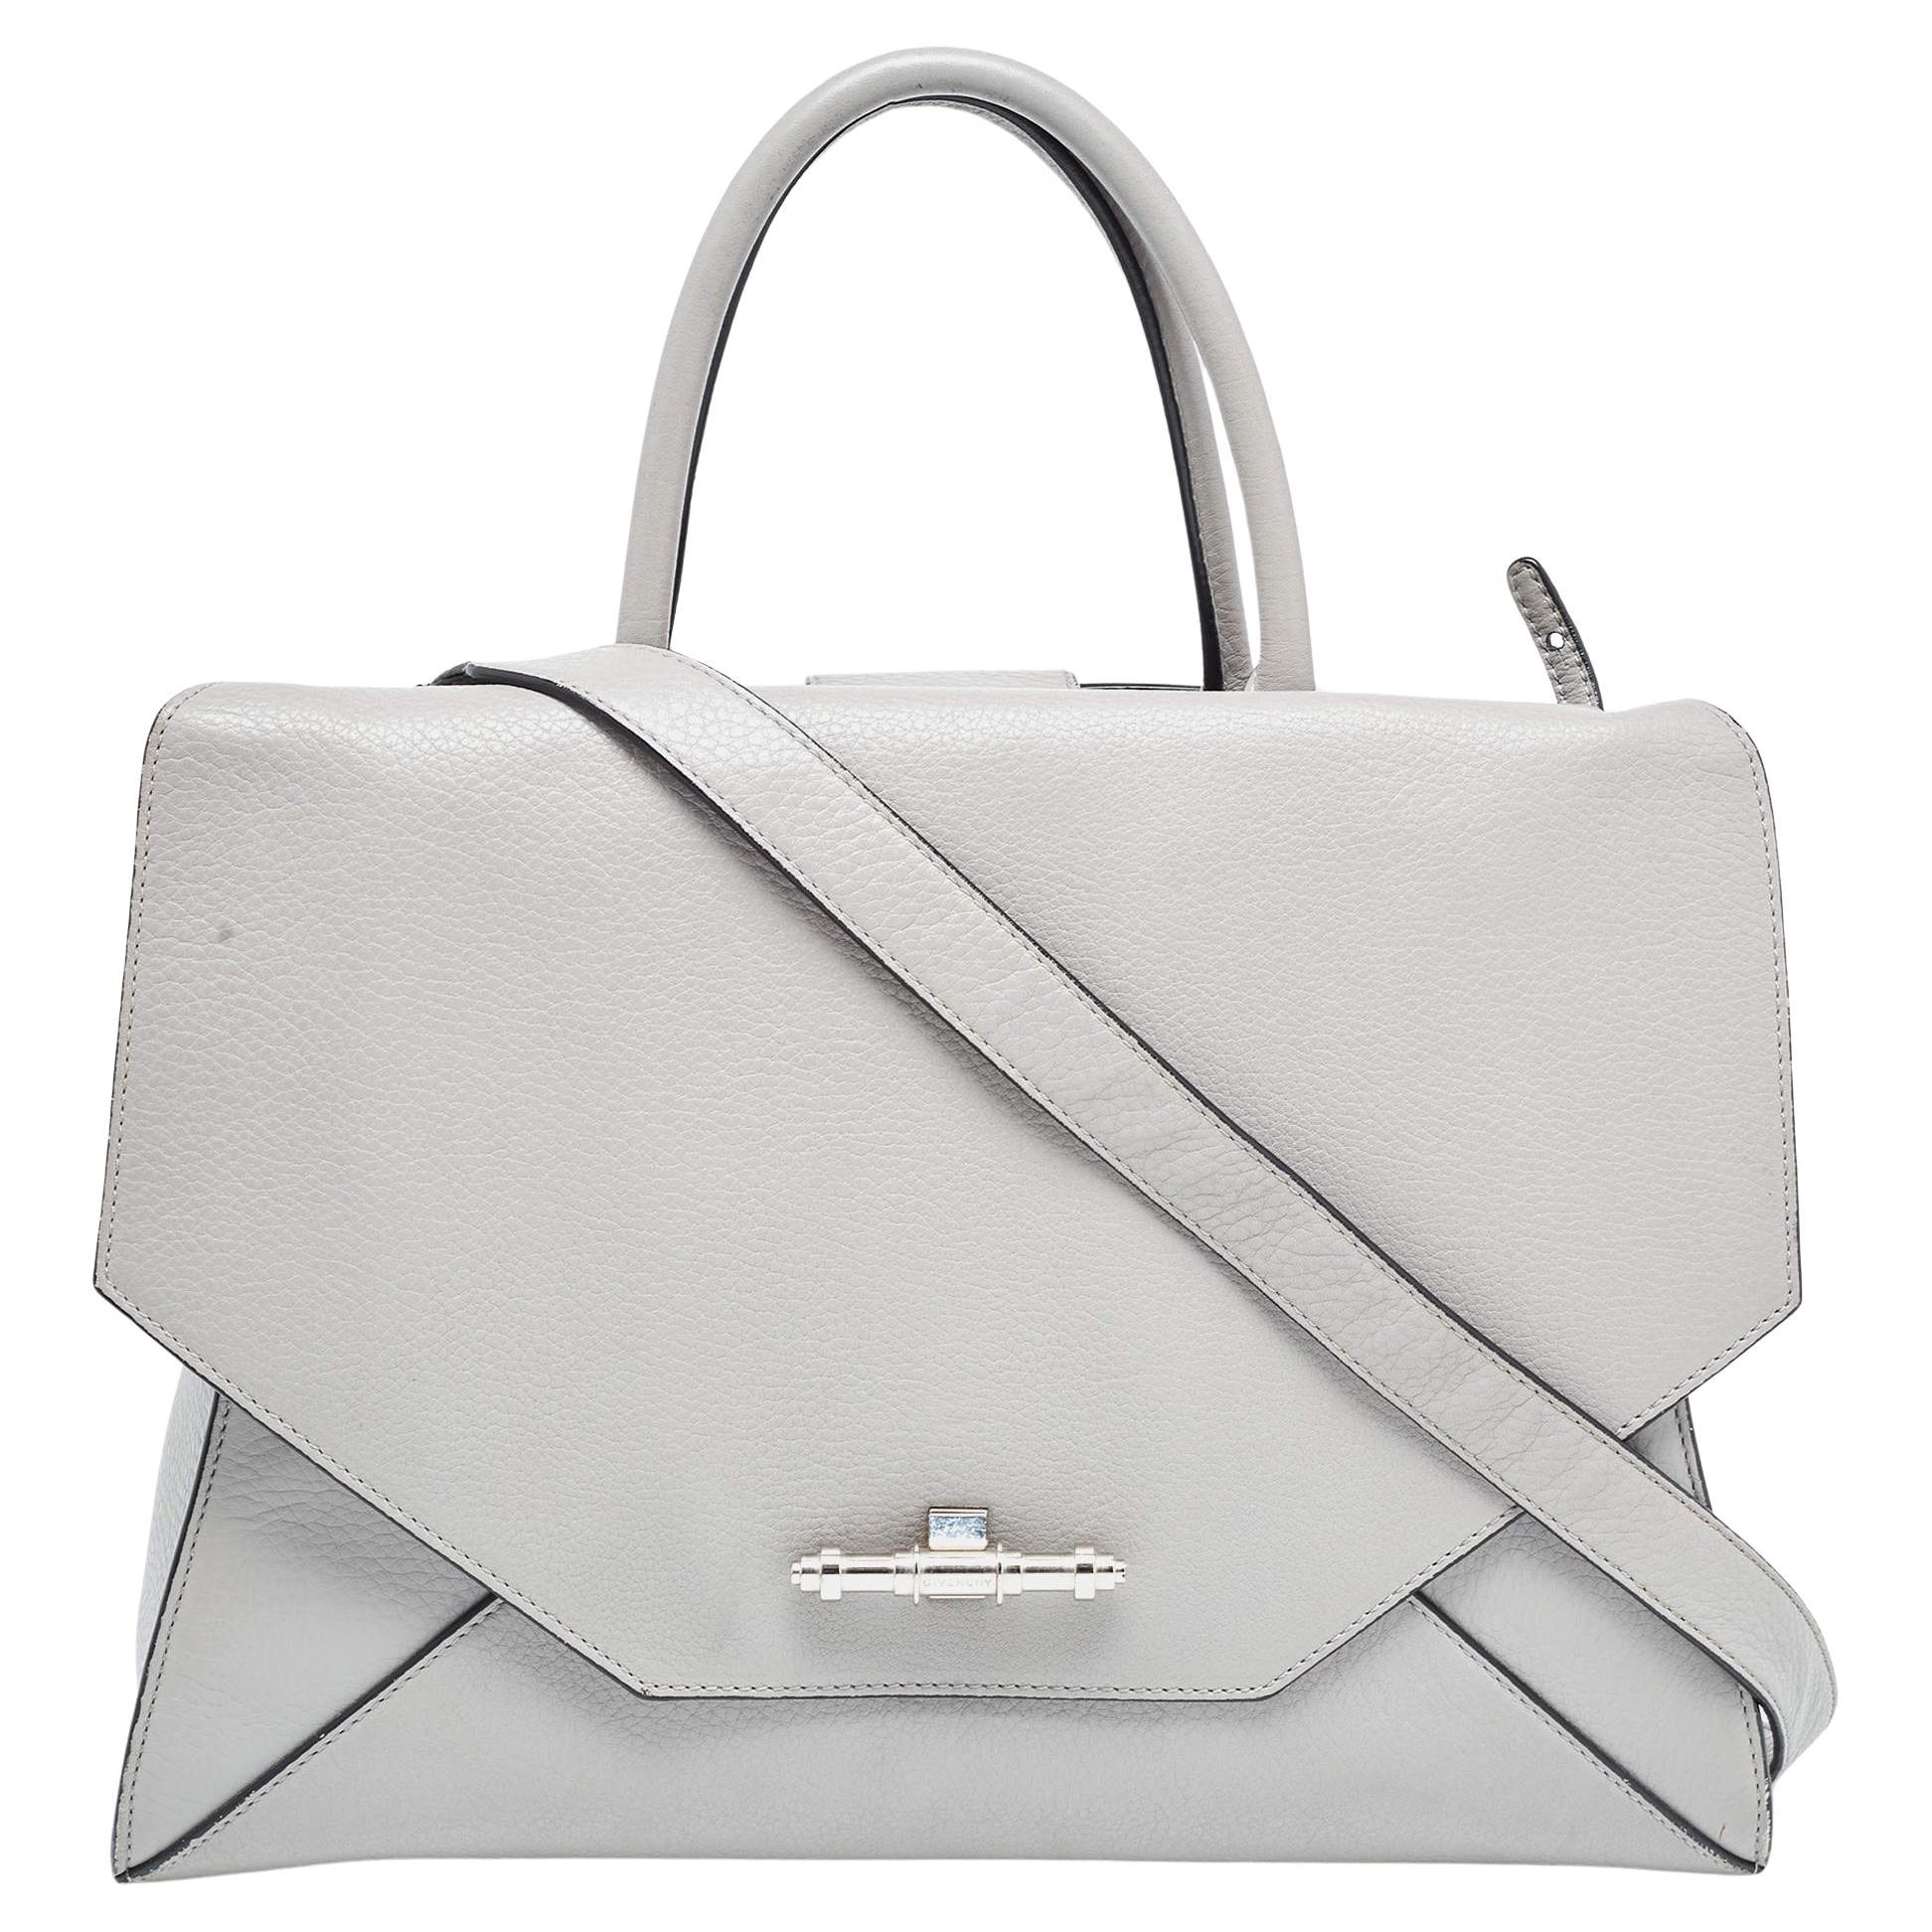 Givenchy Grey Leather Medium Obsedia Tote For Sale